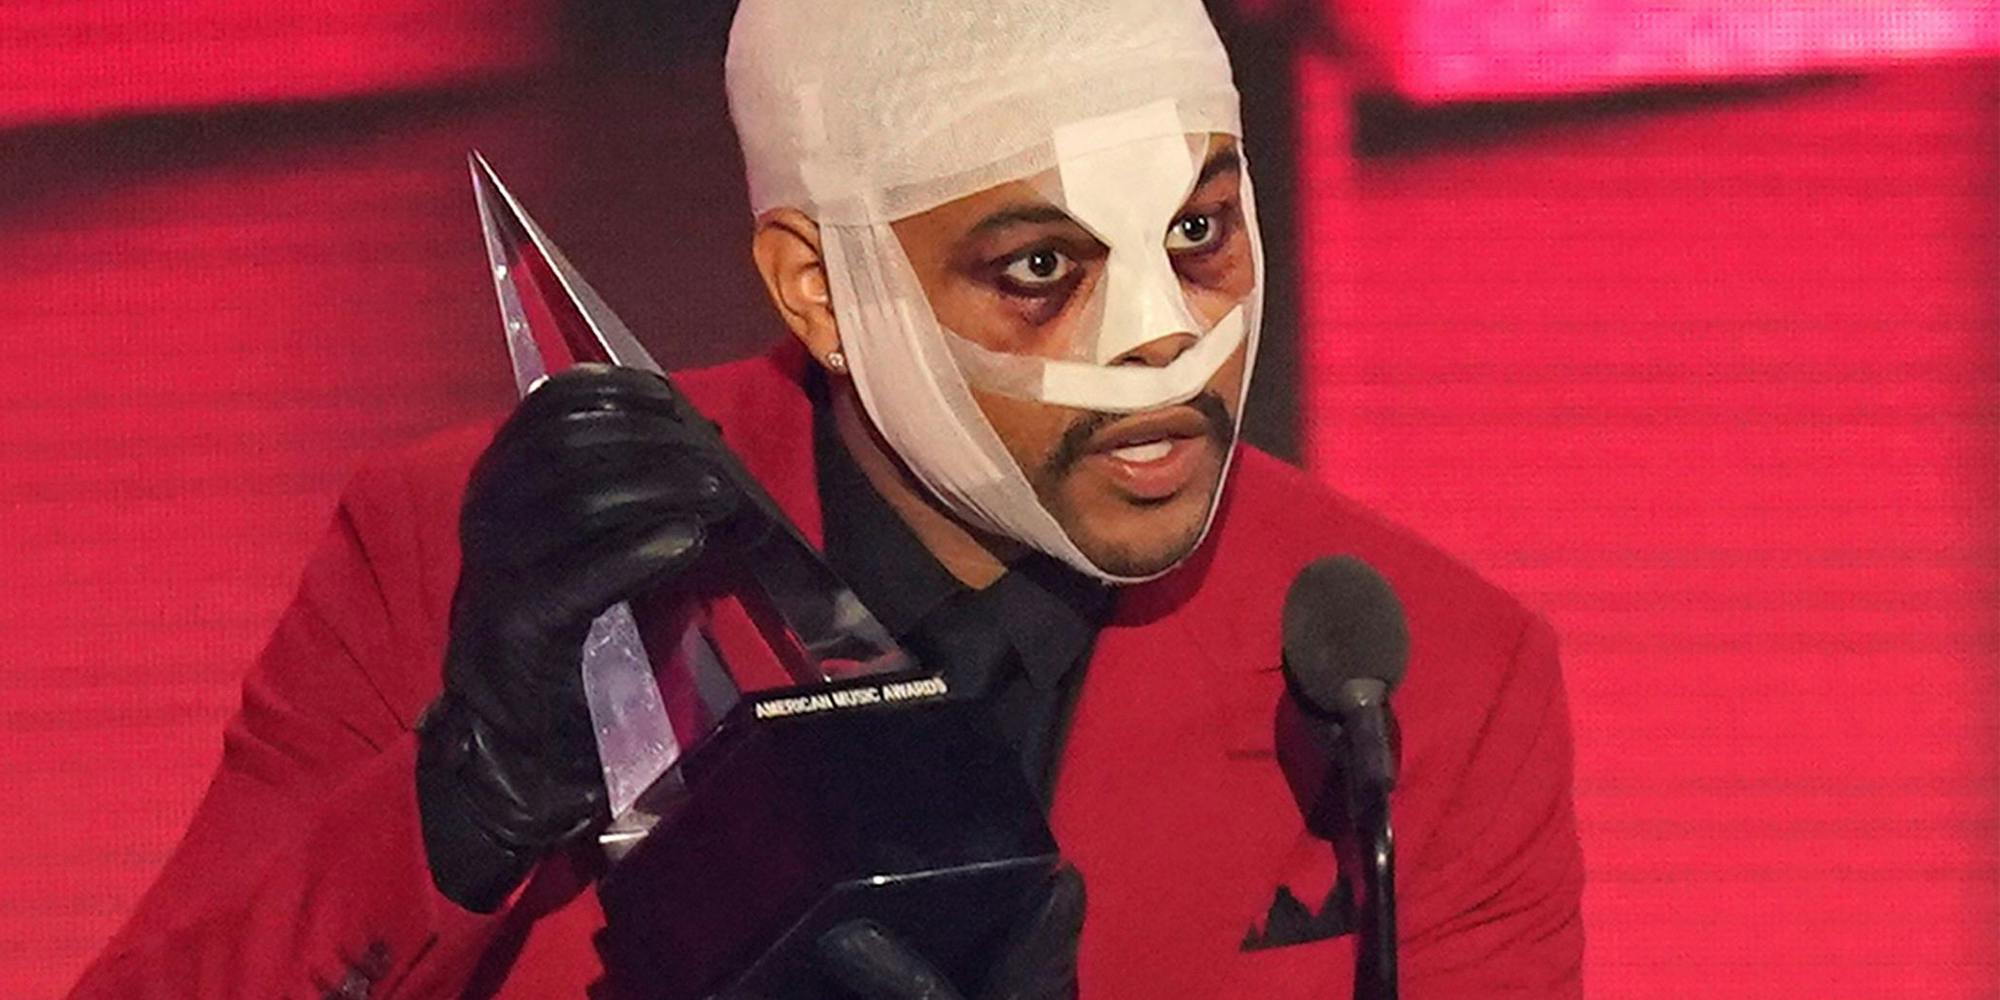 Why The Weeknd Has Bandages, Bloody Face At AMA